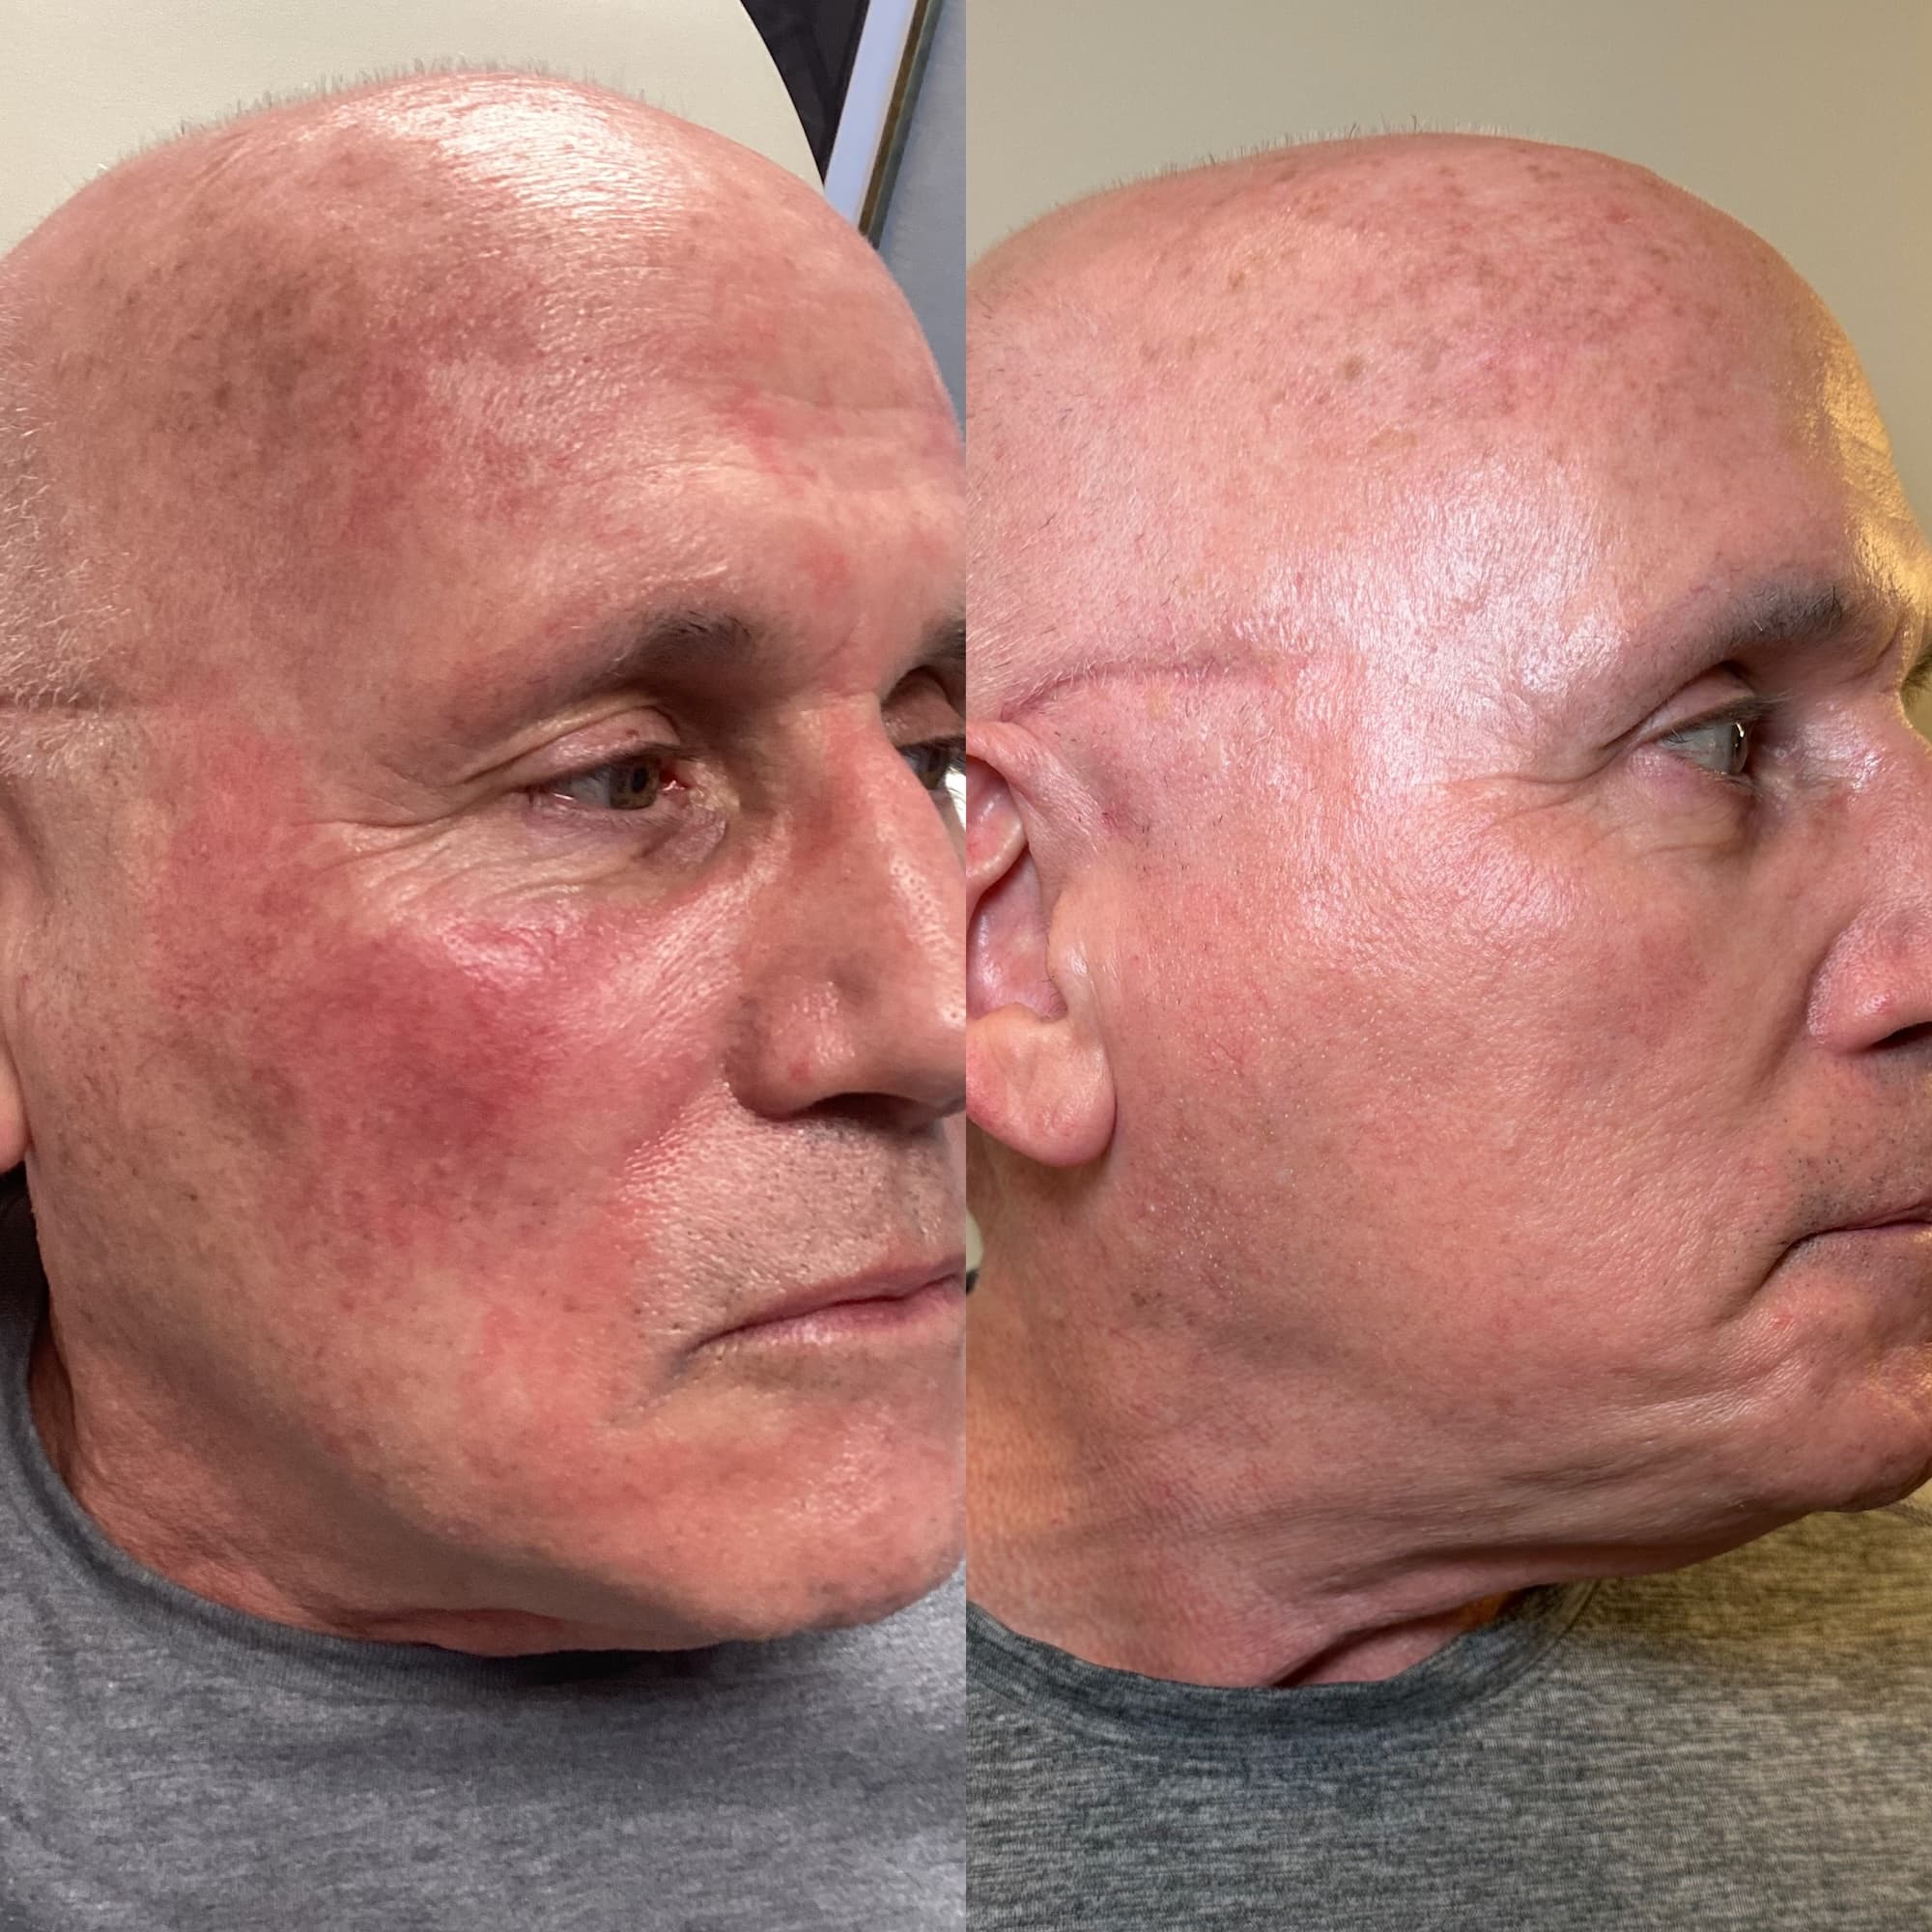 Man's face right side view before and after showing results of BBL and HALO - removal of discolored red patches of skin